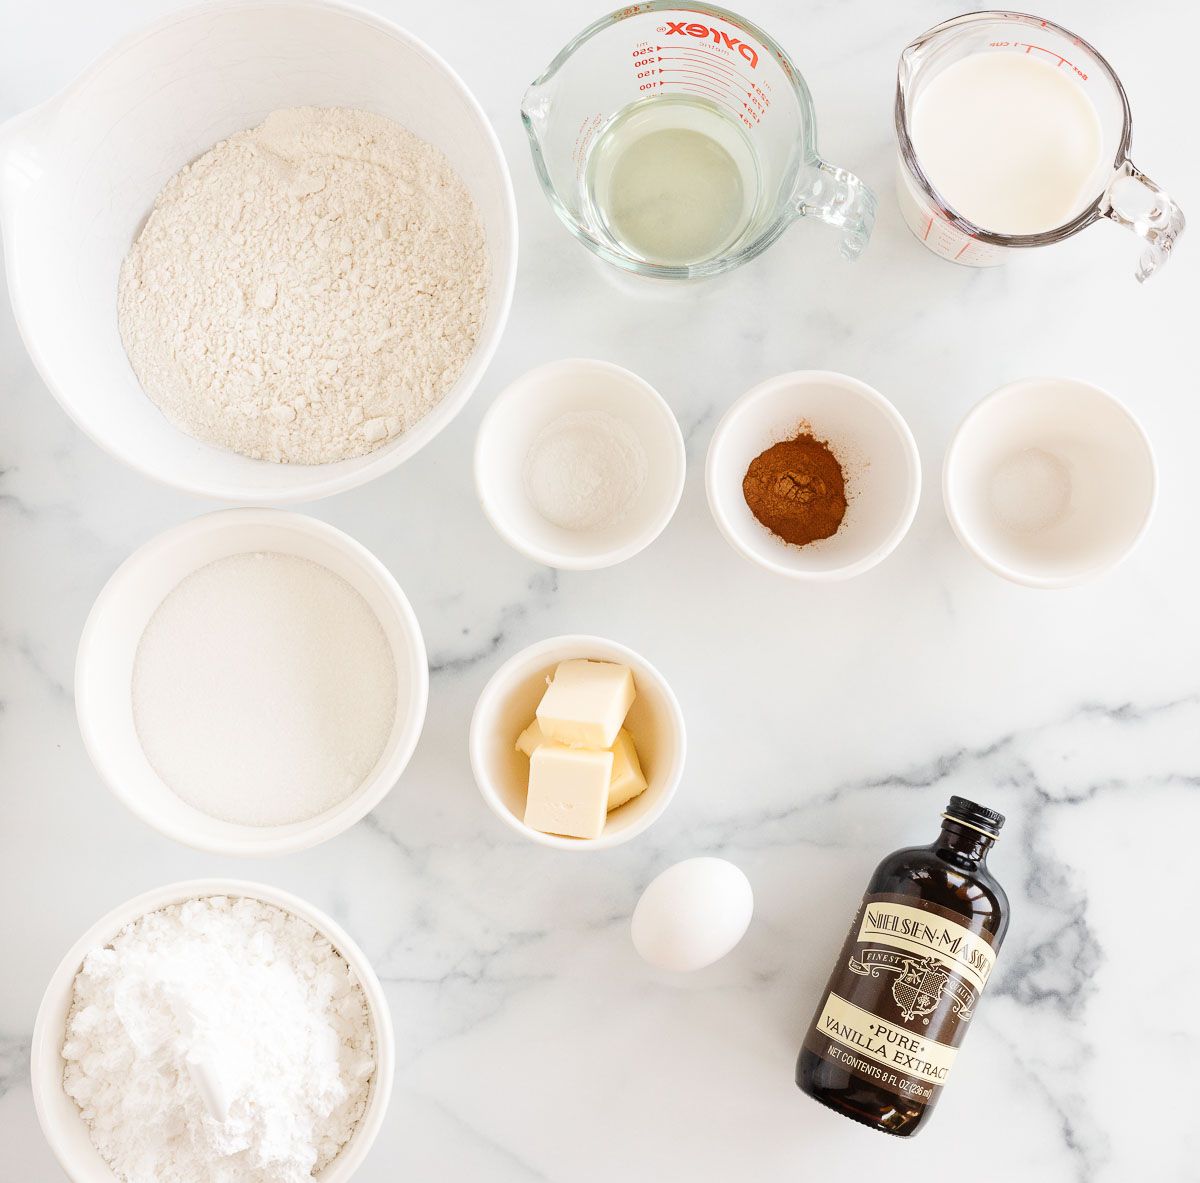 Ingredients for a cinnamon roll bread recipe laid out on a marble countertop